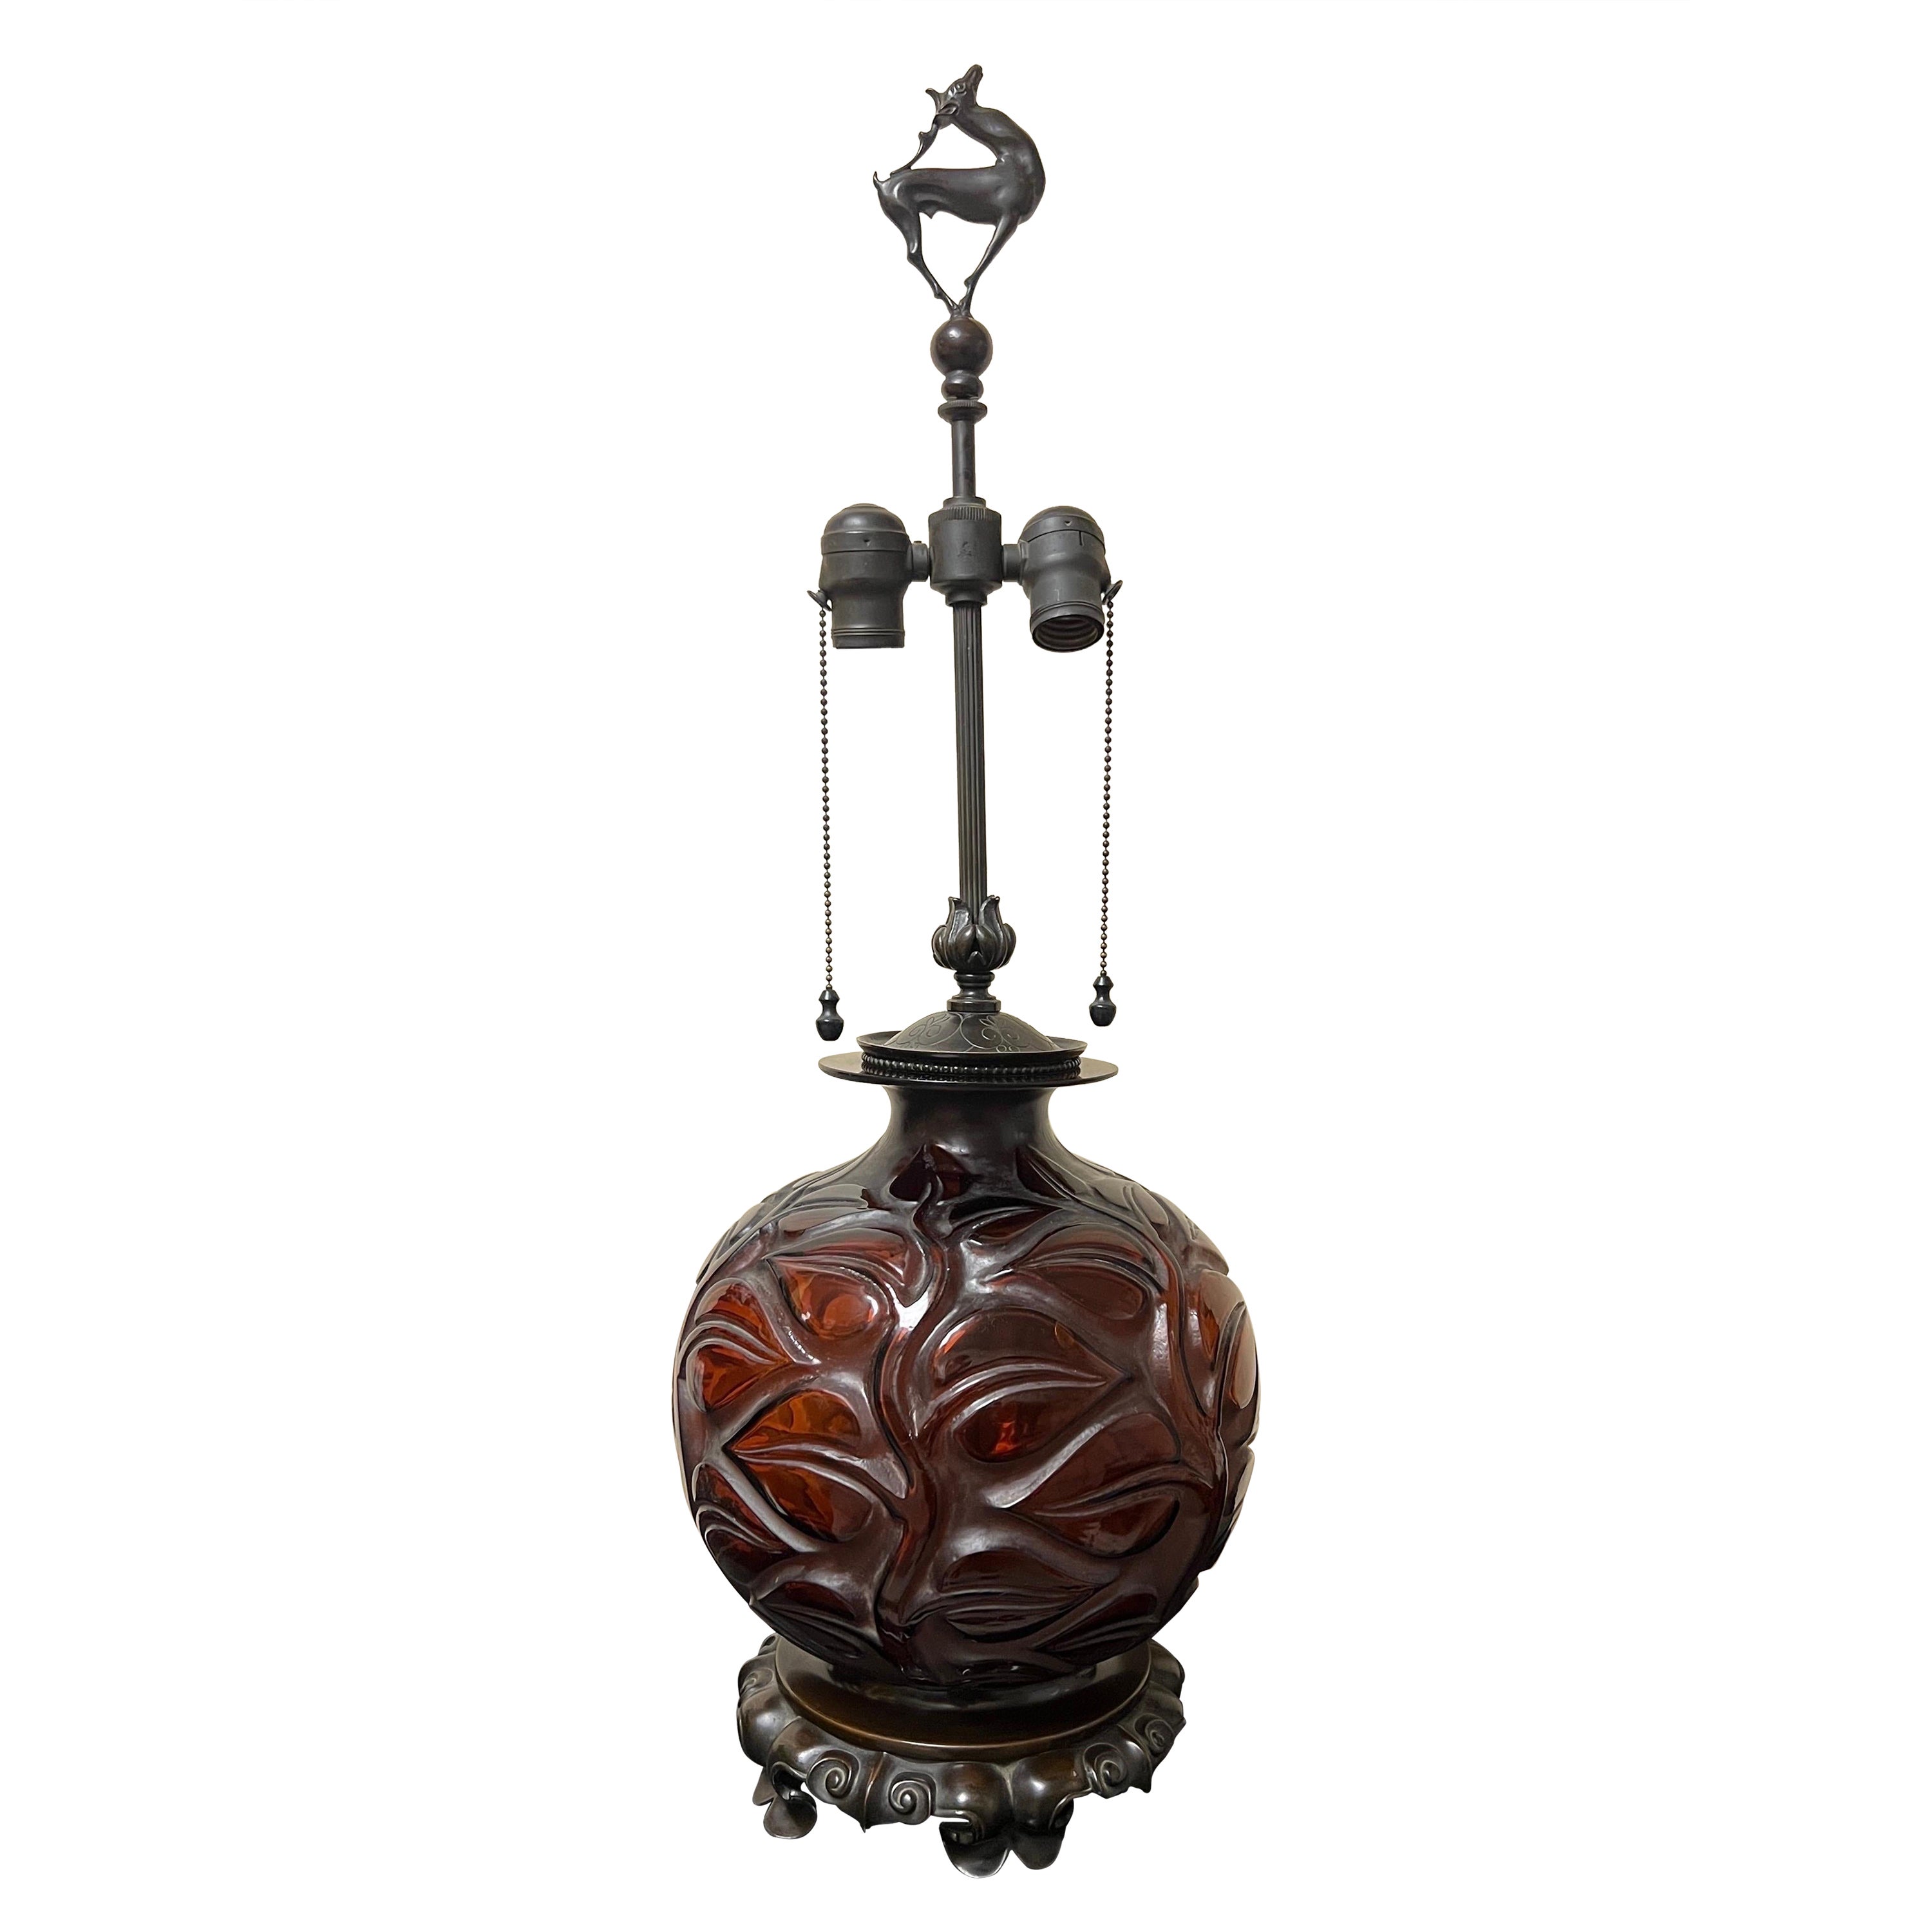 Rene Lalique “Sophora” Amber Glass & Bronze Mounted Table Lamp, circa 1926 For Sale